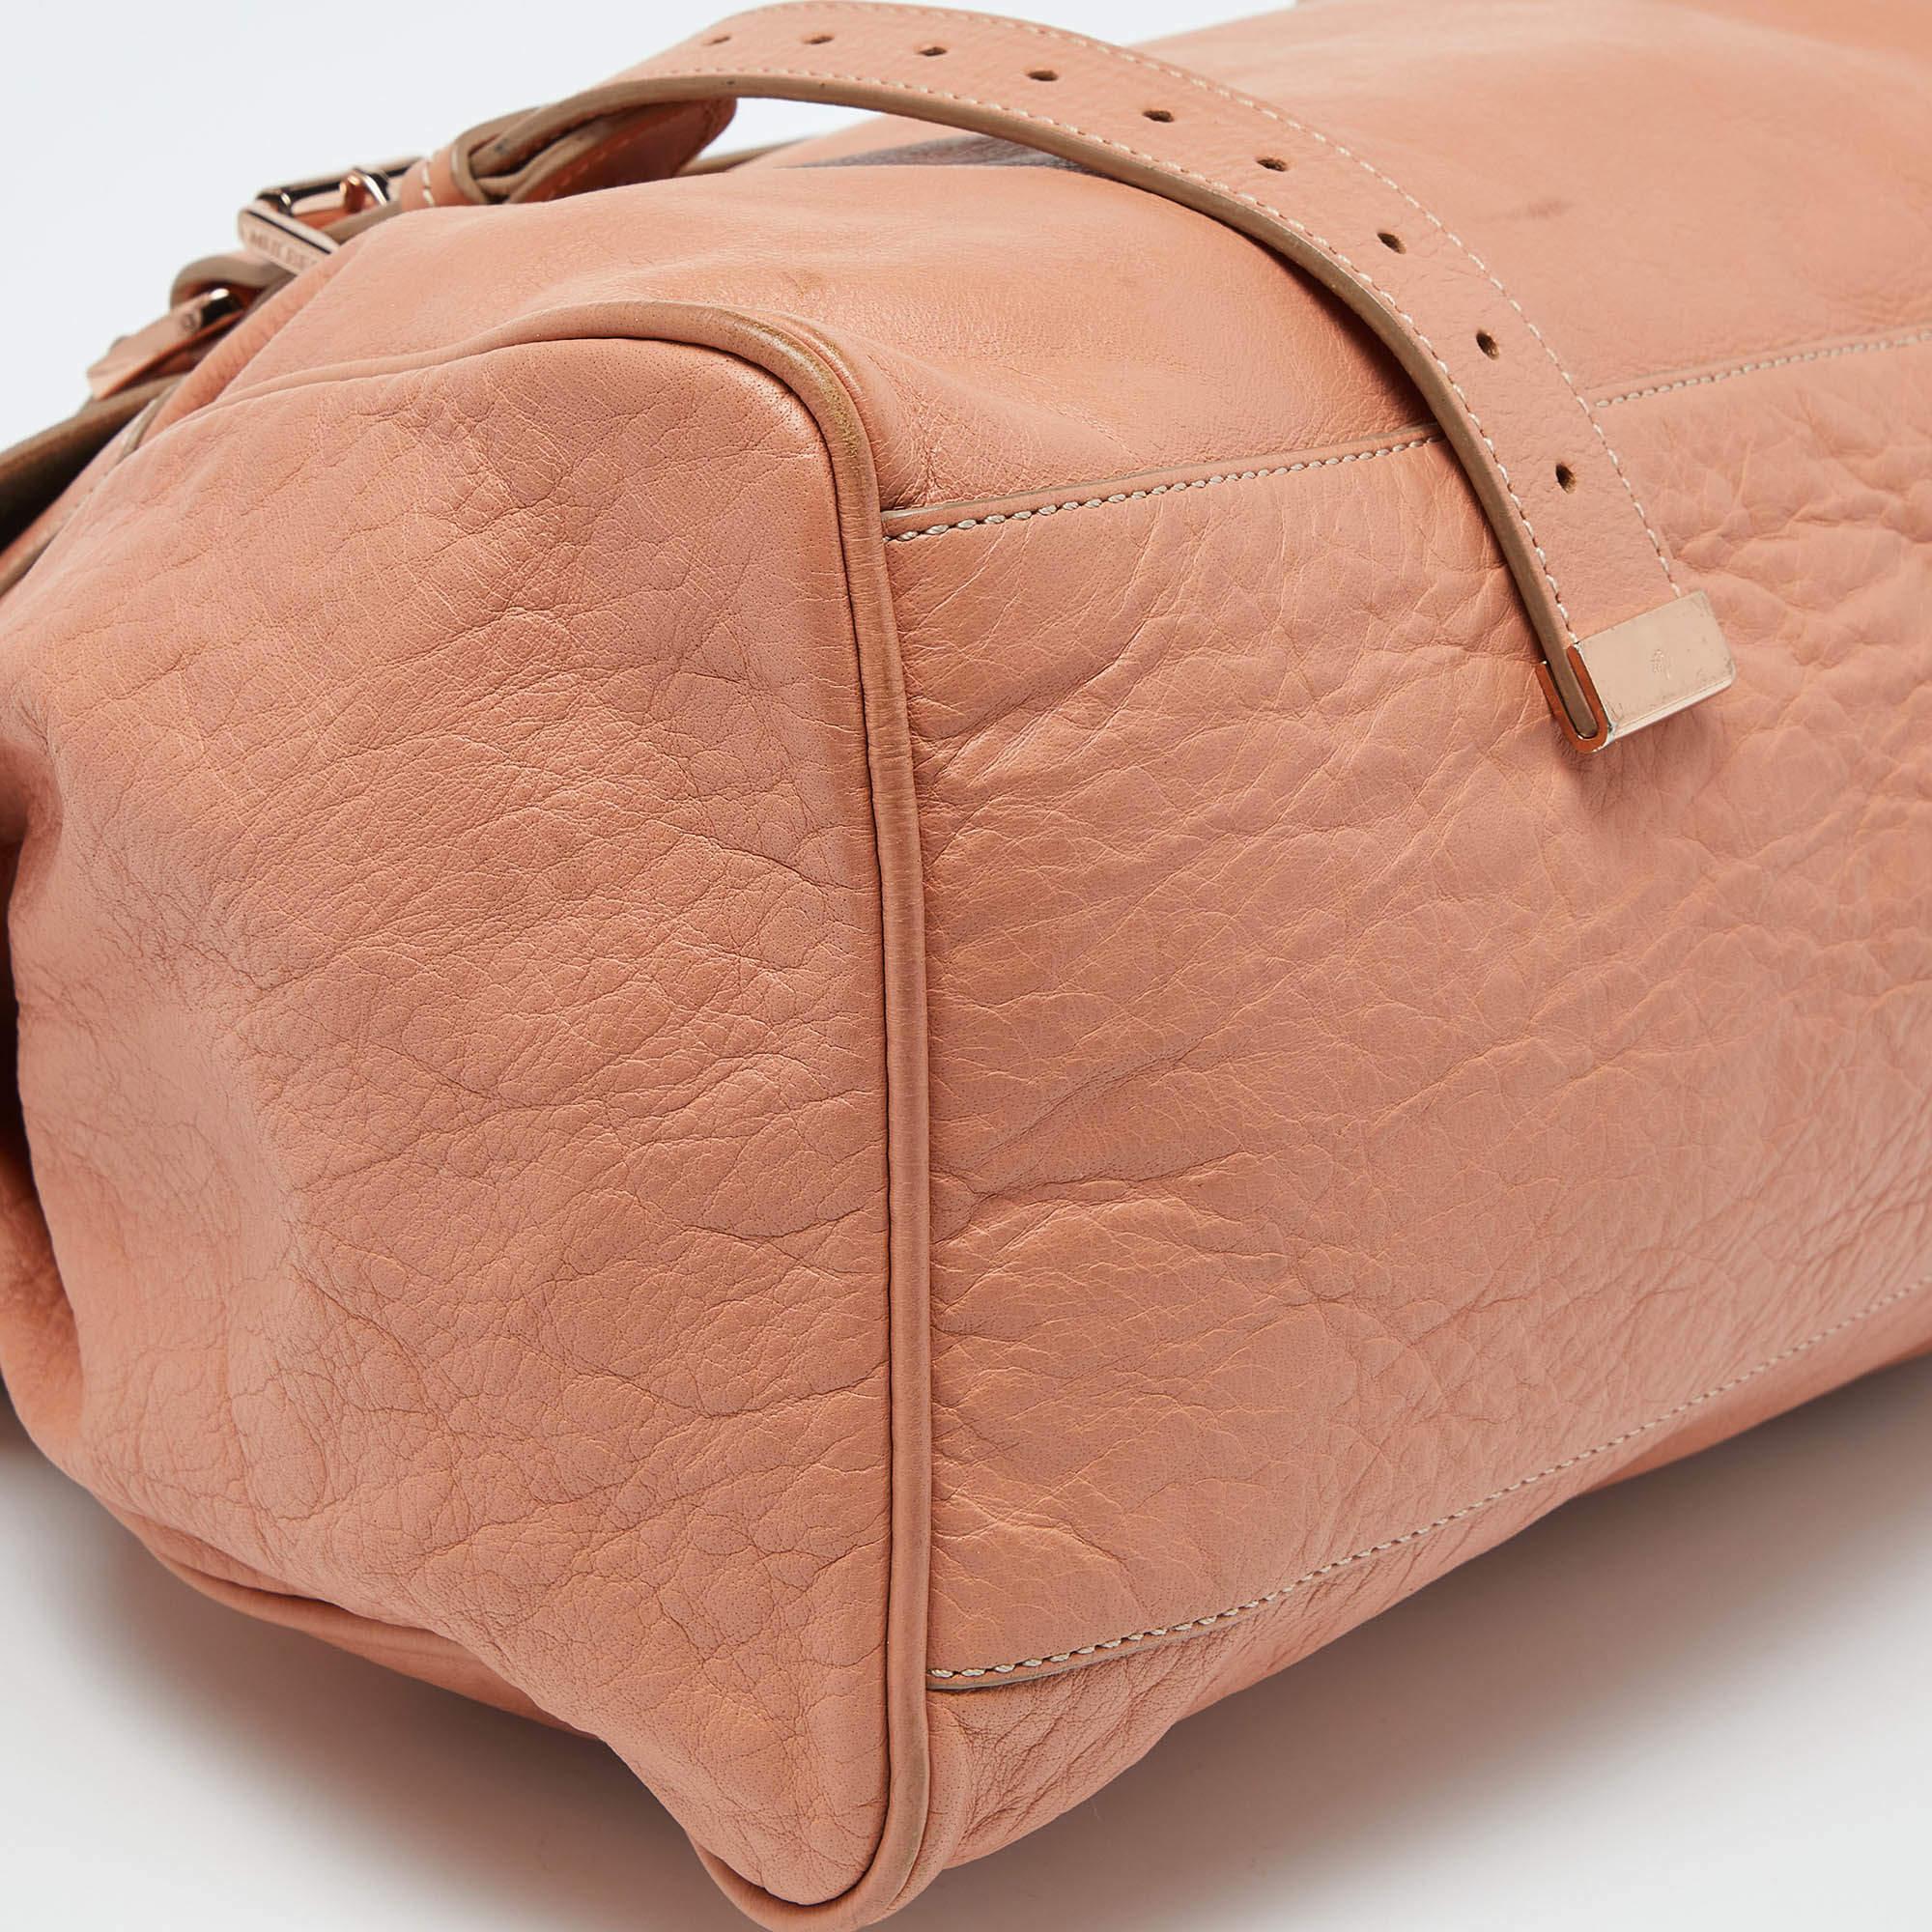 Mulberry Peach Leather Oversized Alexa Satchel For Sale 4